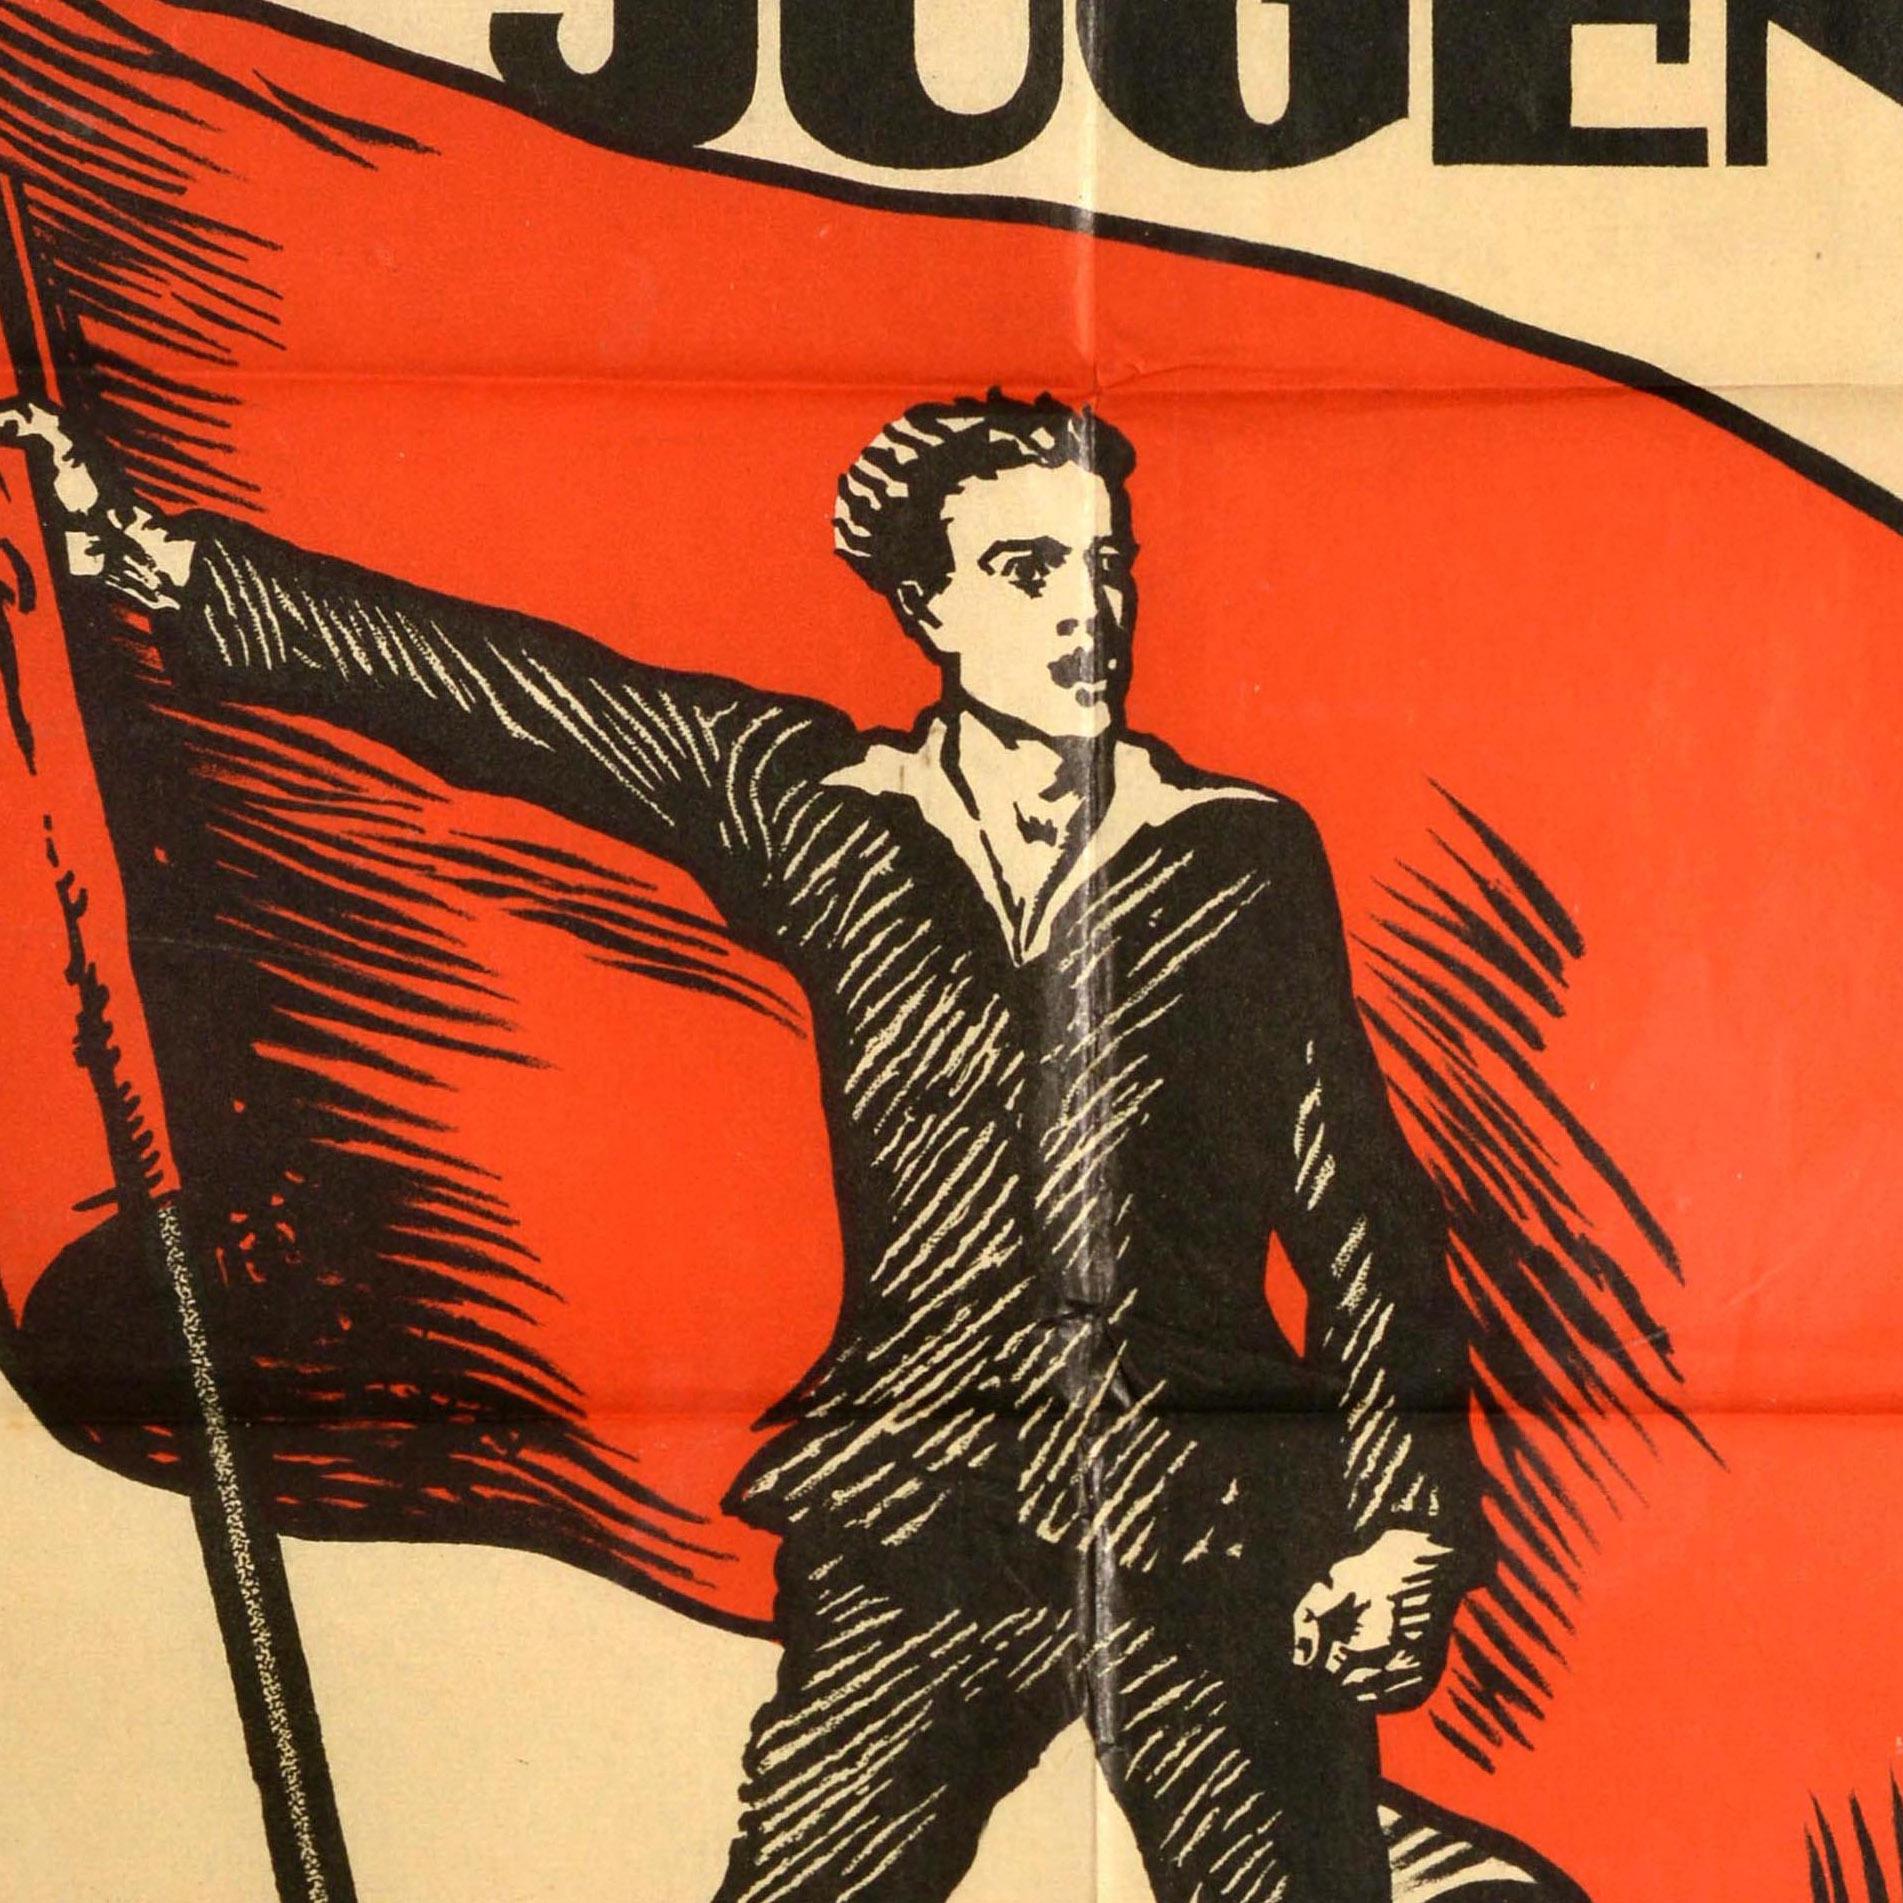 Affiche de propagande vintage originale - Arbeiter Jugend hinein in die Arbeiter Jugendvereine / Workers' Youth into the Workers' Youth Associations - comportant une illustration d'un jeune homme brandissant une grande bannière rouge, le poing